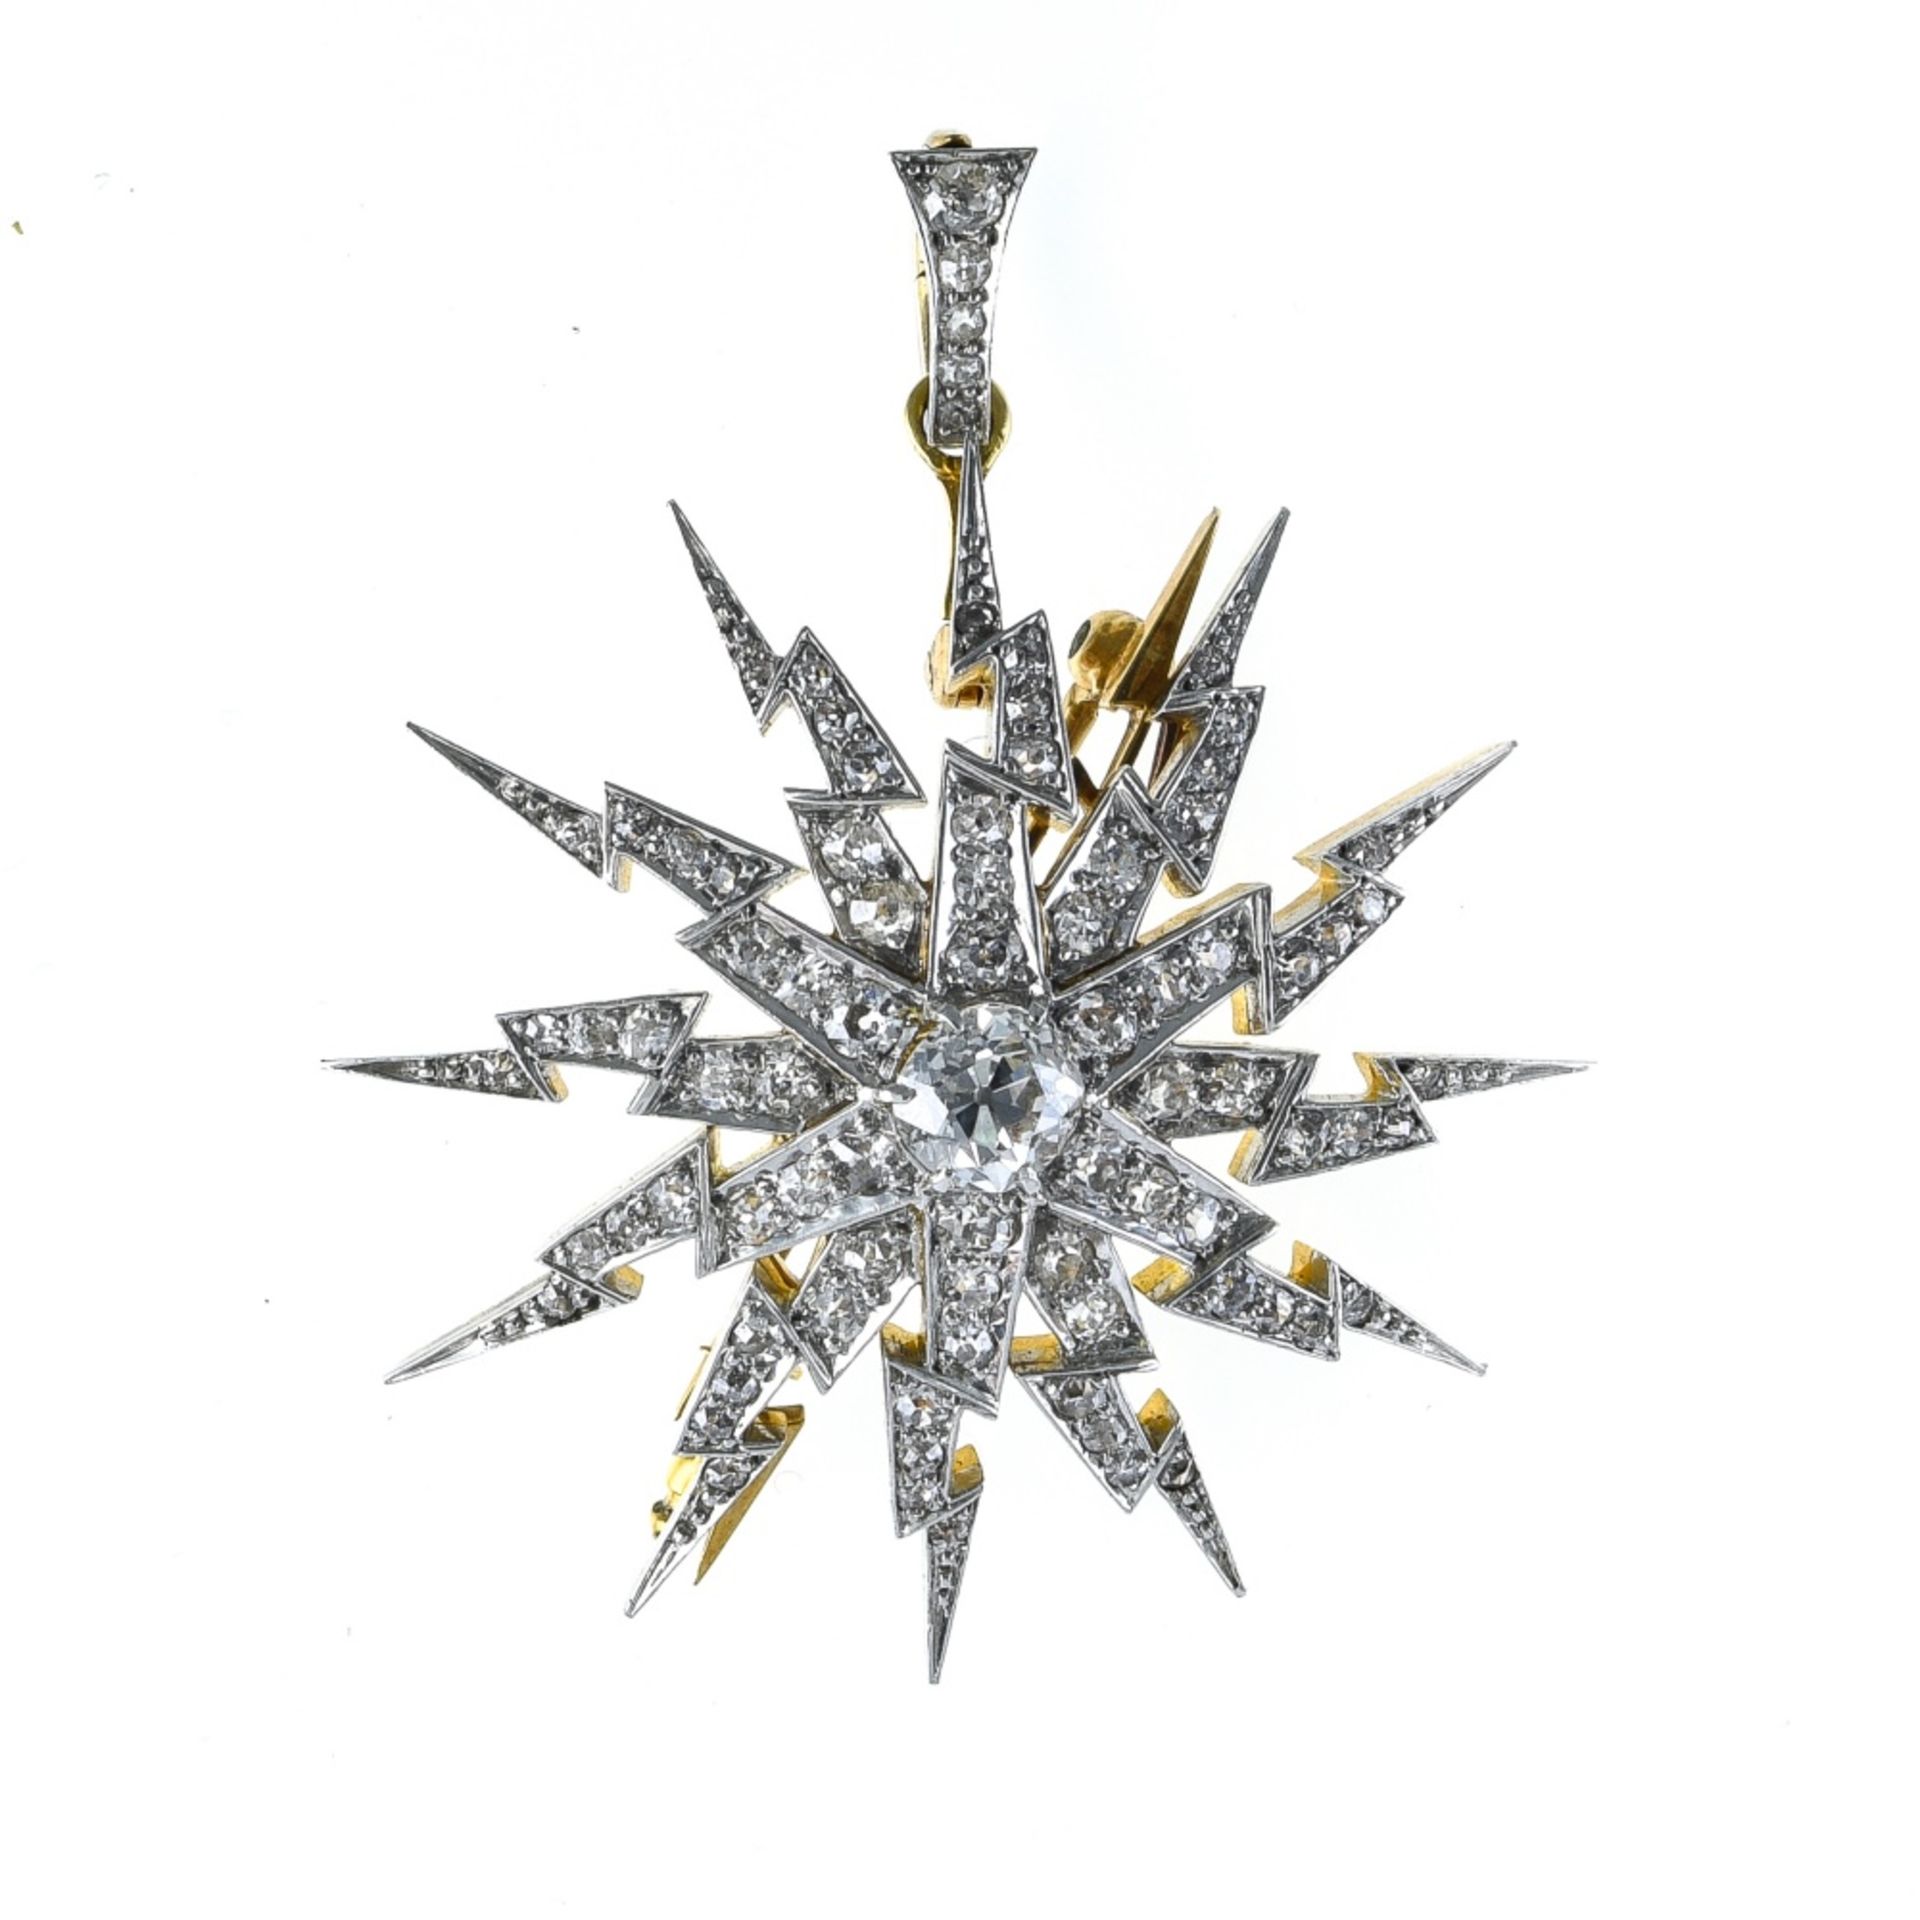 Star brooch-pendant 18 kt yellow and white gold, +/- 0.60 ct diamond. Poids (gr) : 12,9